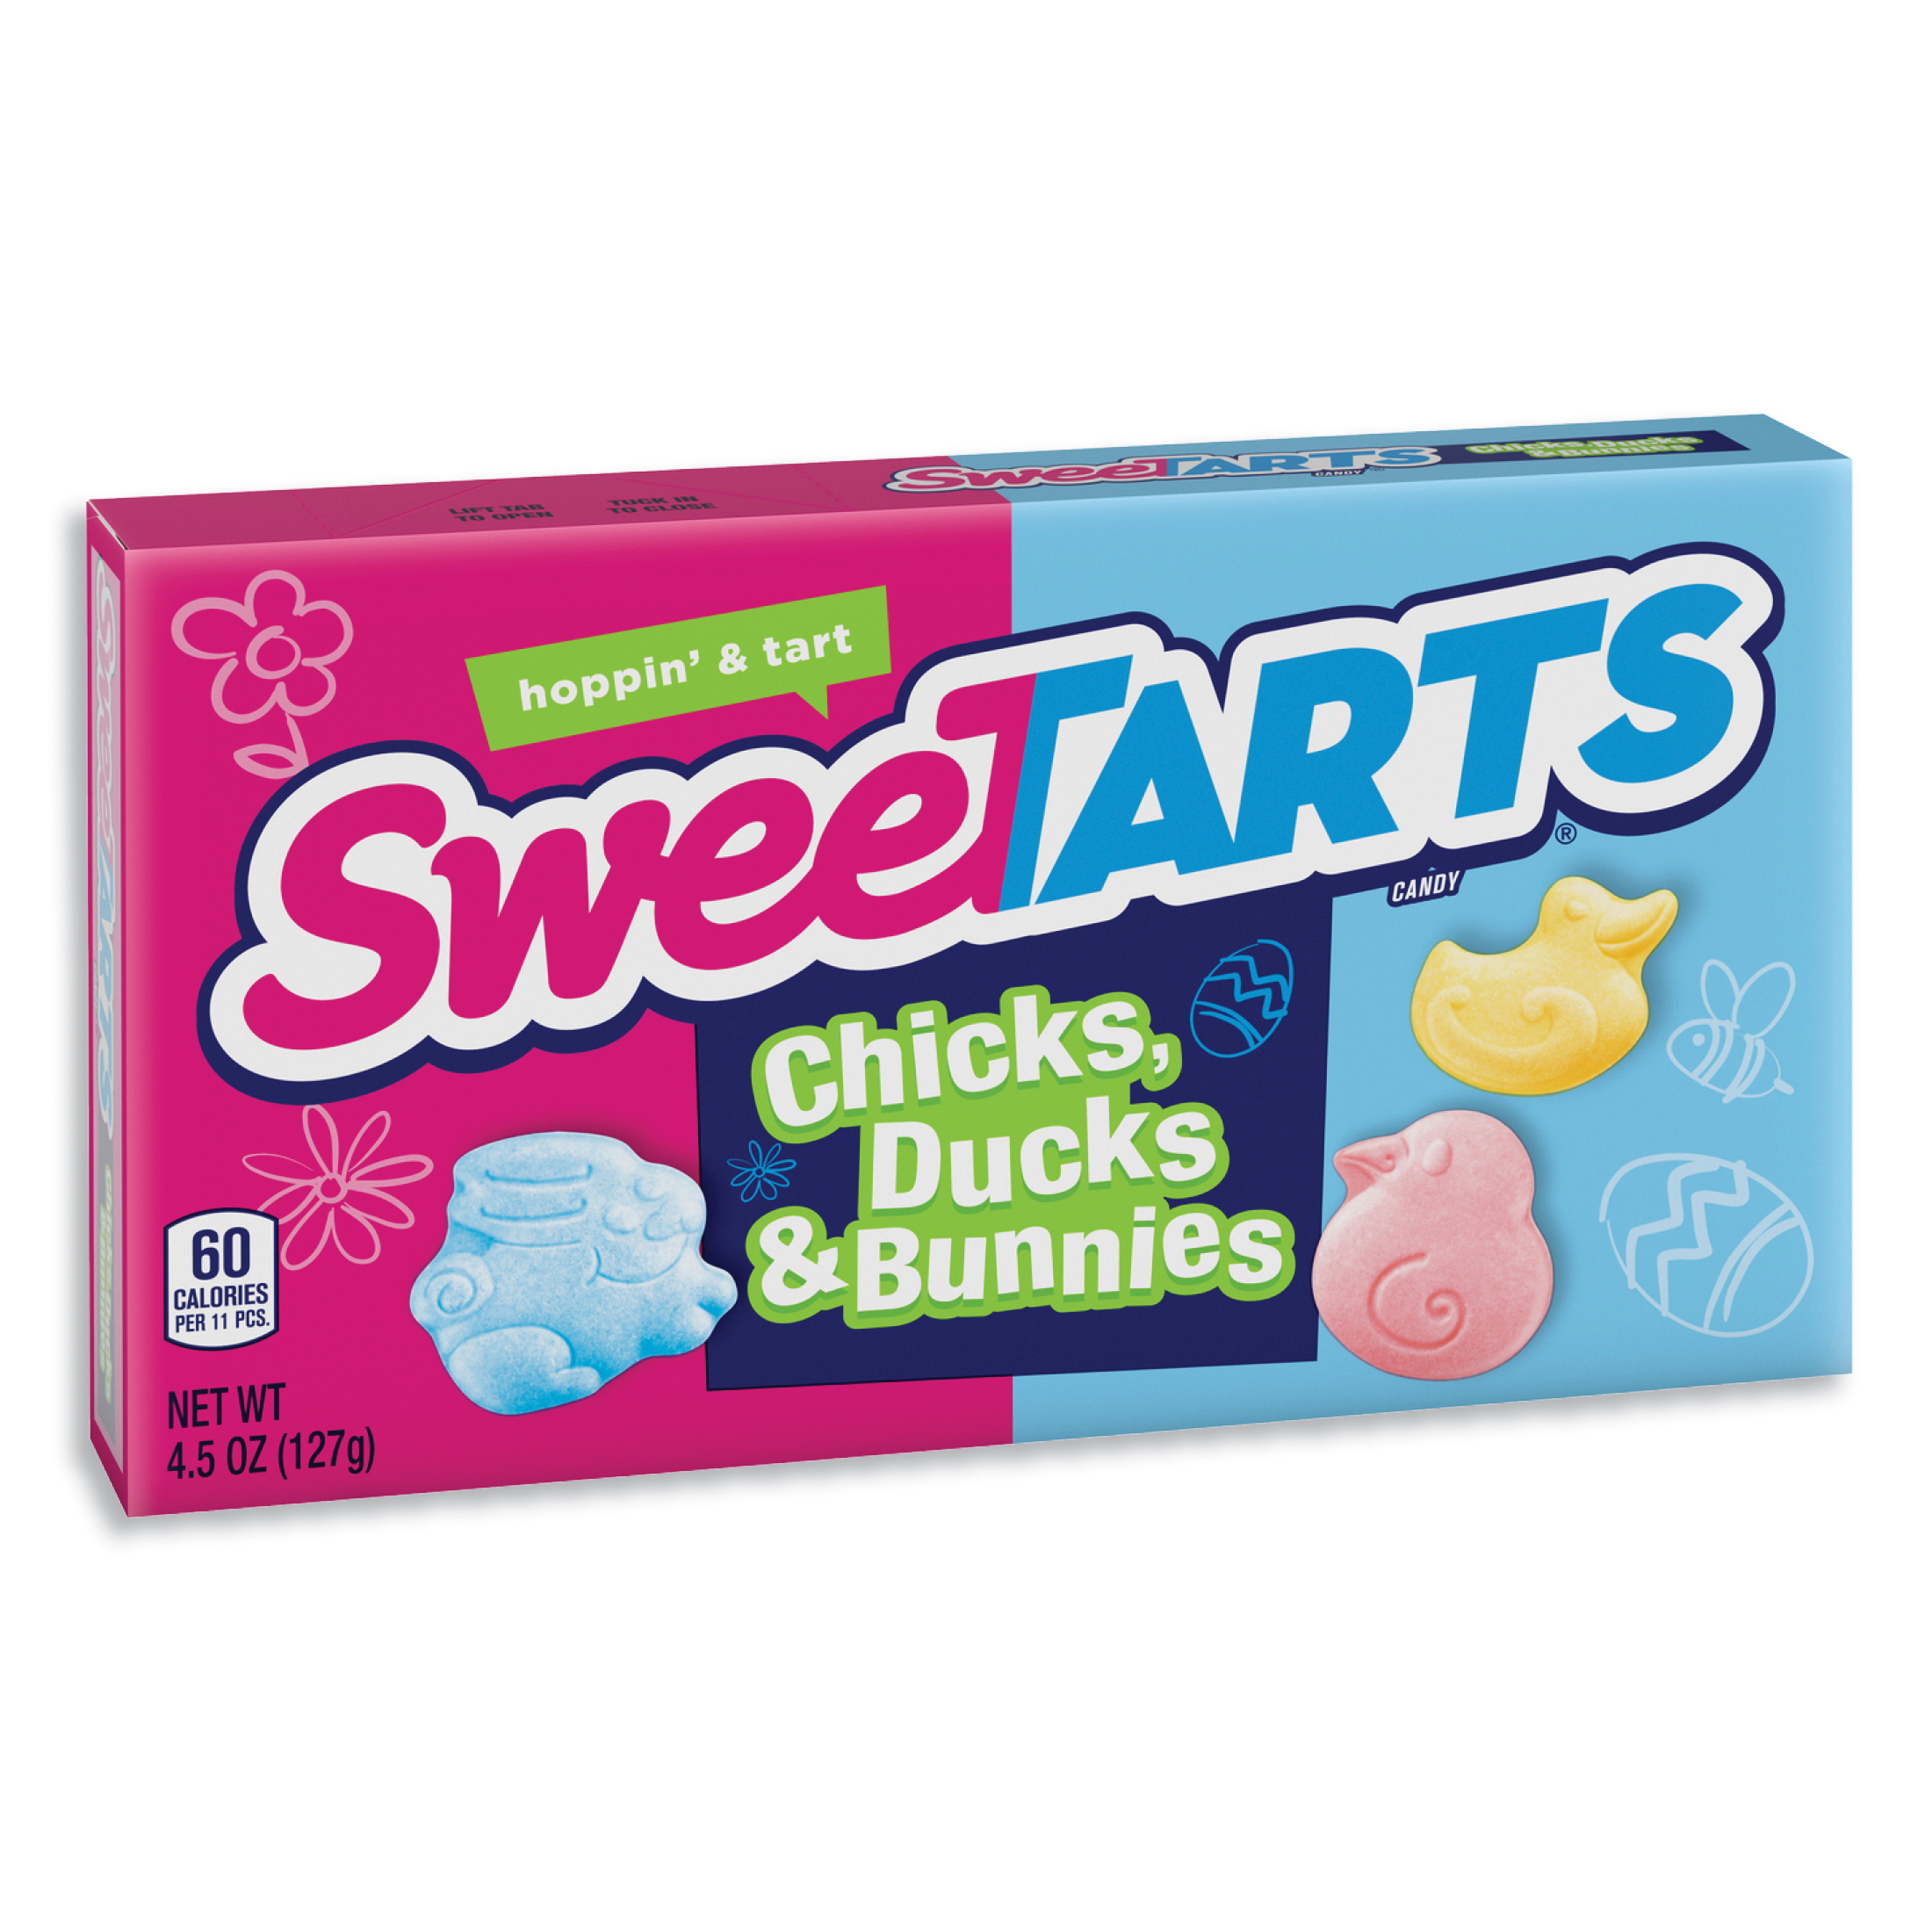 SweeTARTS Chicks, Ducks, & Bunnies Easter Candy, 4.5 oz, Theater Box - image 1 of 7